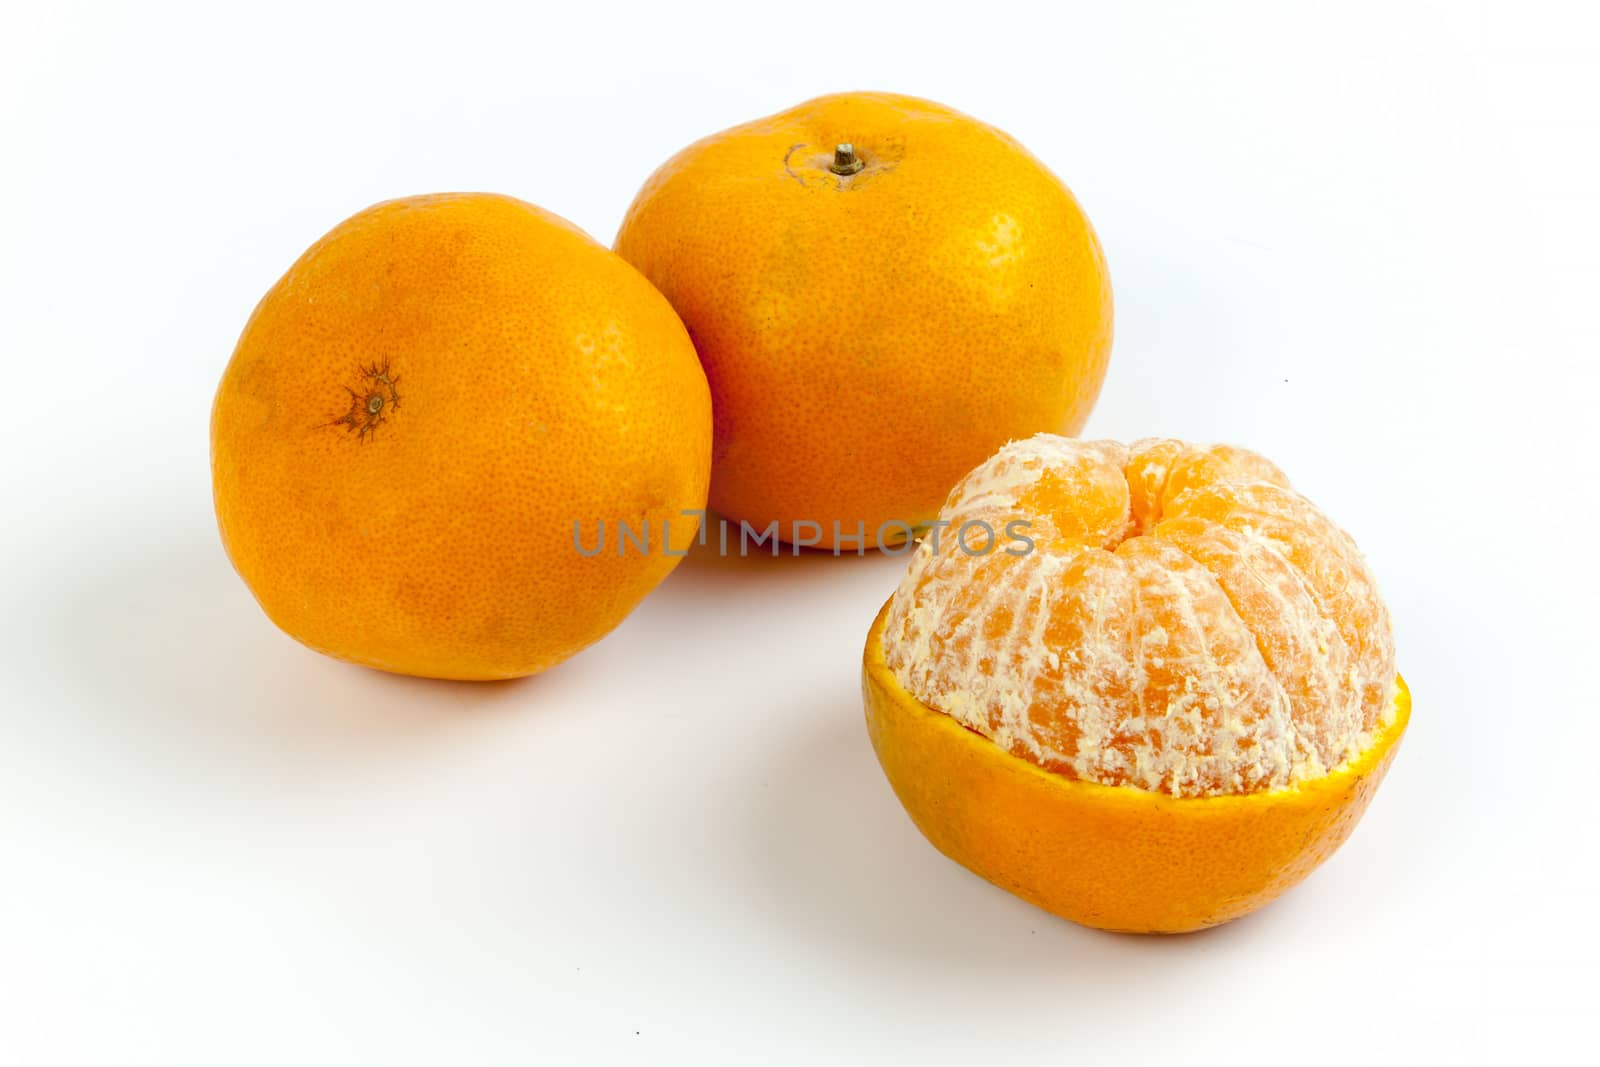 Ripe oranges isolated on white background. Orange in a cut.